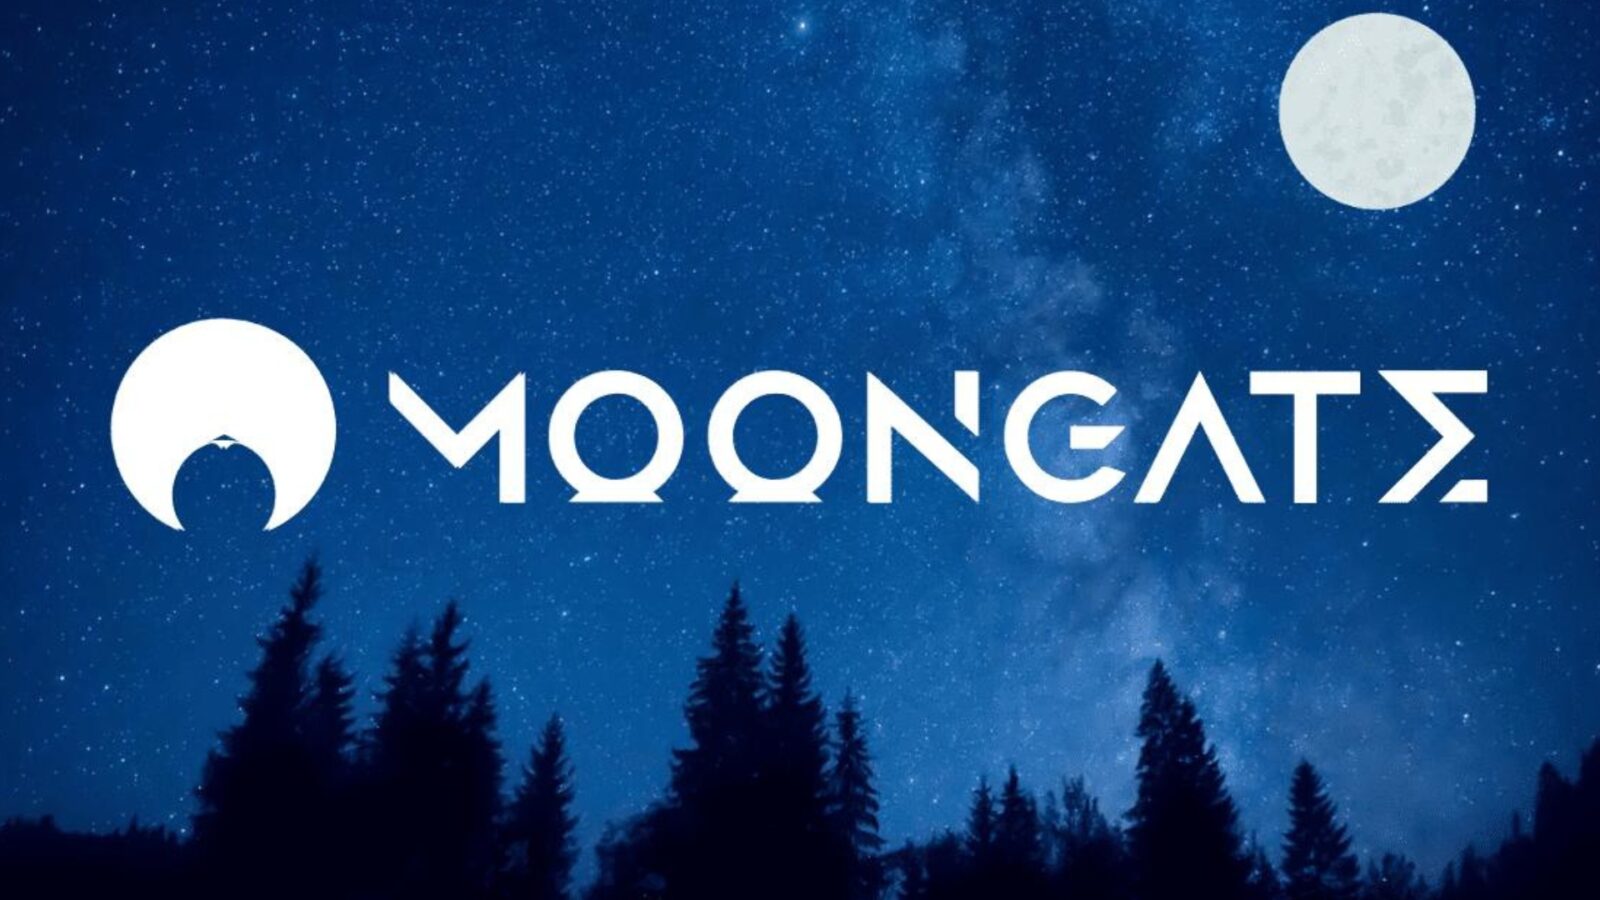 Moongate Secures $2.7M to Develop a Modular Web3 Engagement Layer